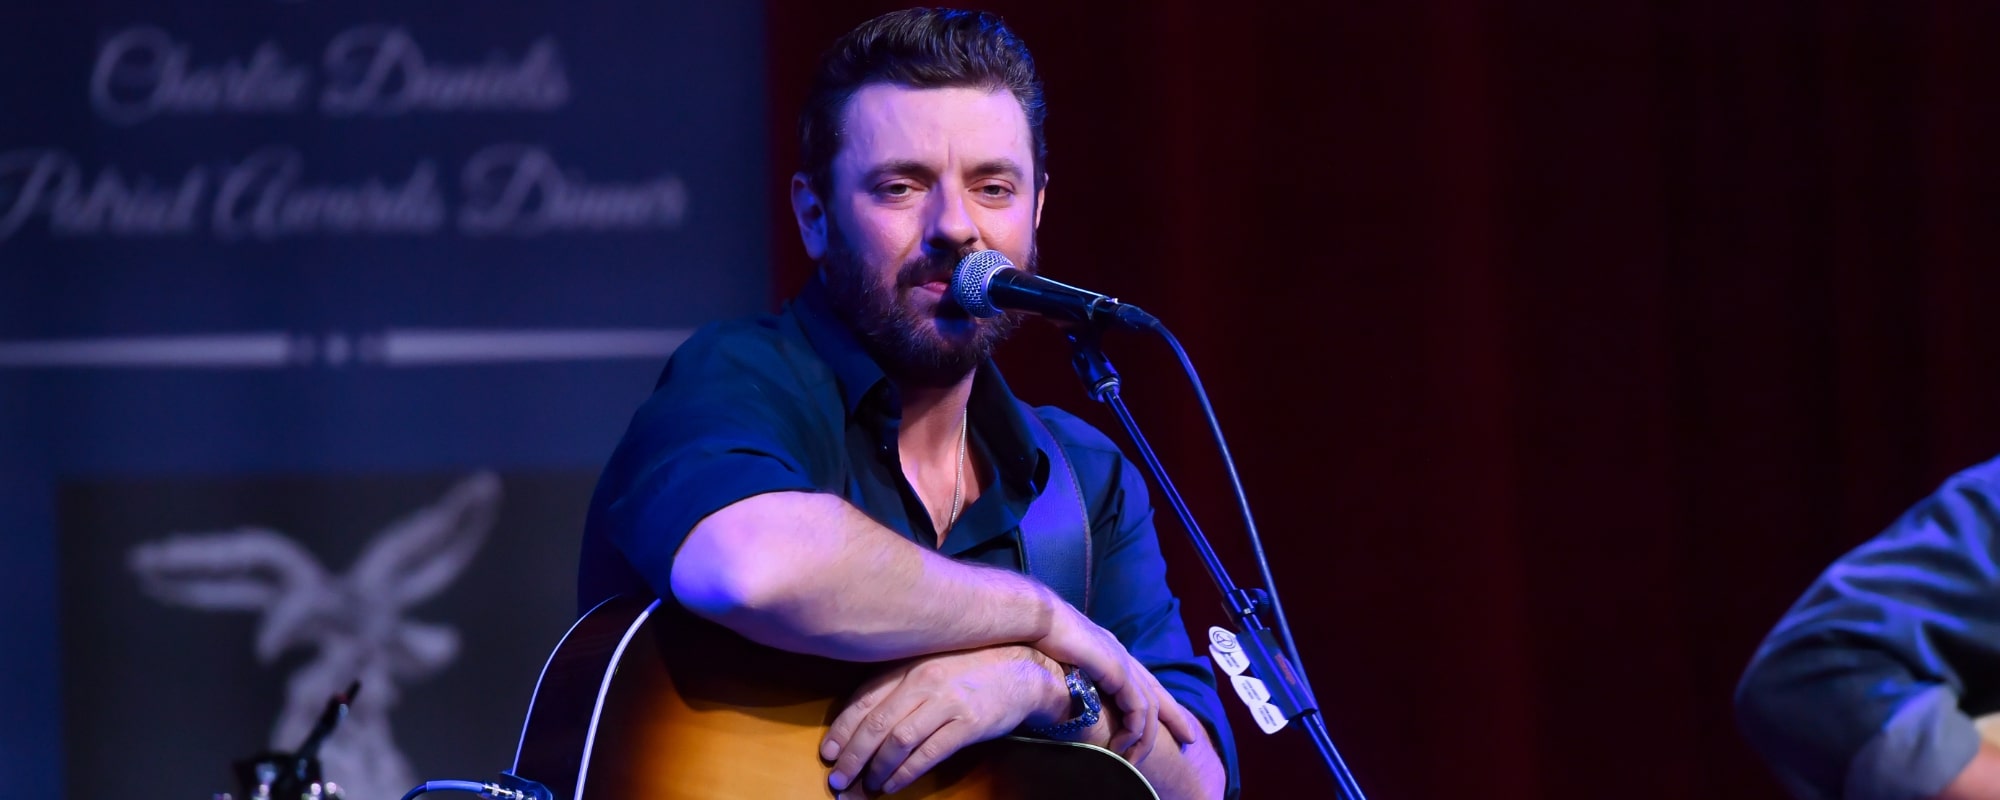 Country Singer Chris Young Arrested for Disorderly Conduct, Assaulting an Officer at Midtown Nashville Bar